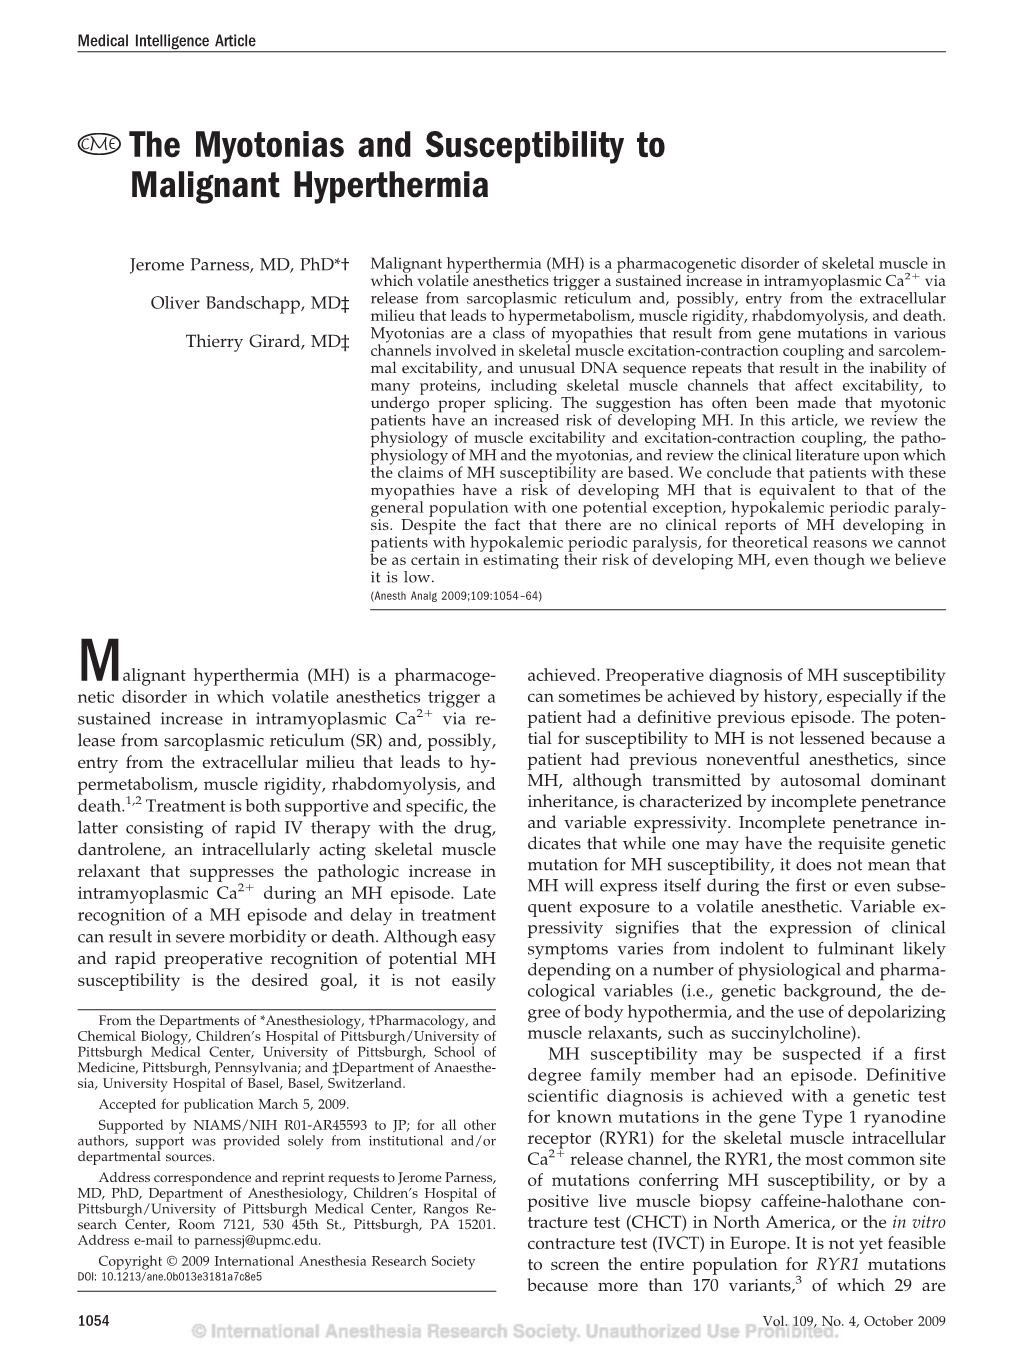 The Myotonias and Susceptibility to Malignant Hyperthermia